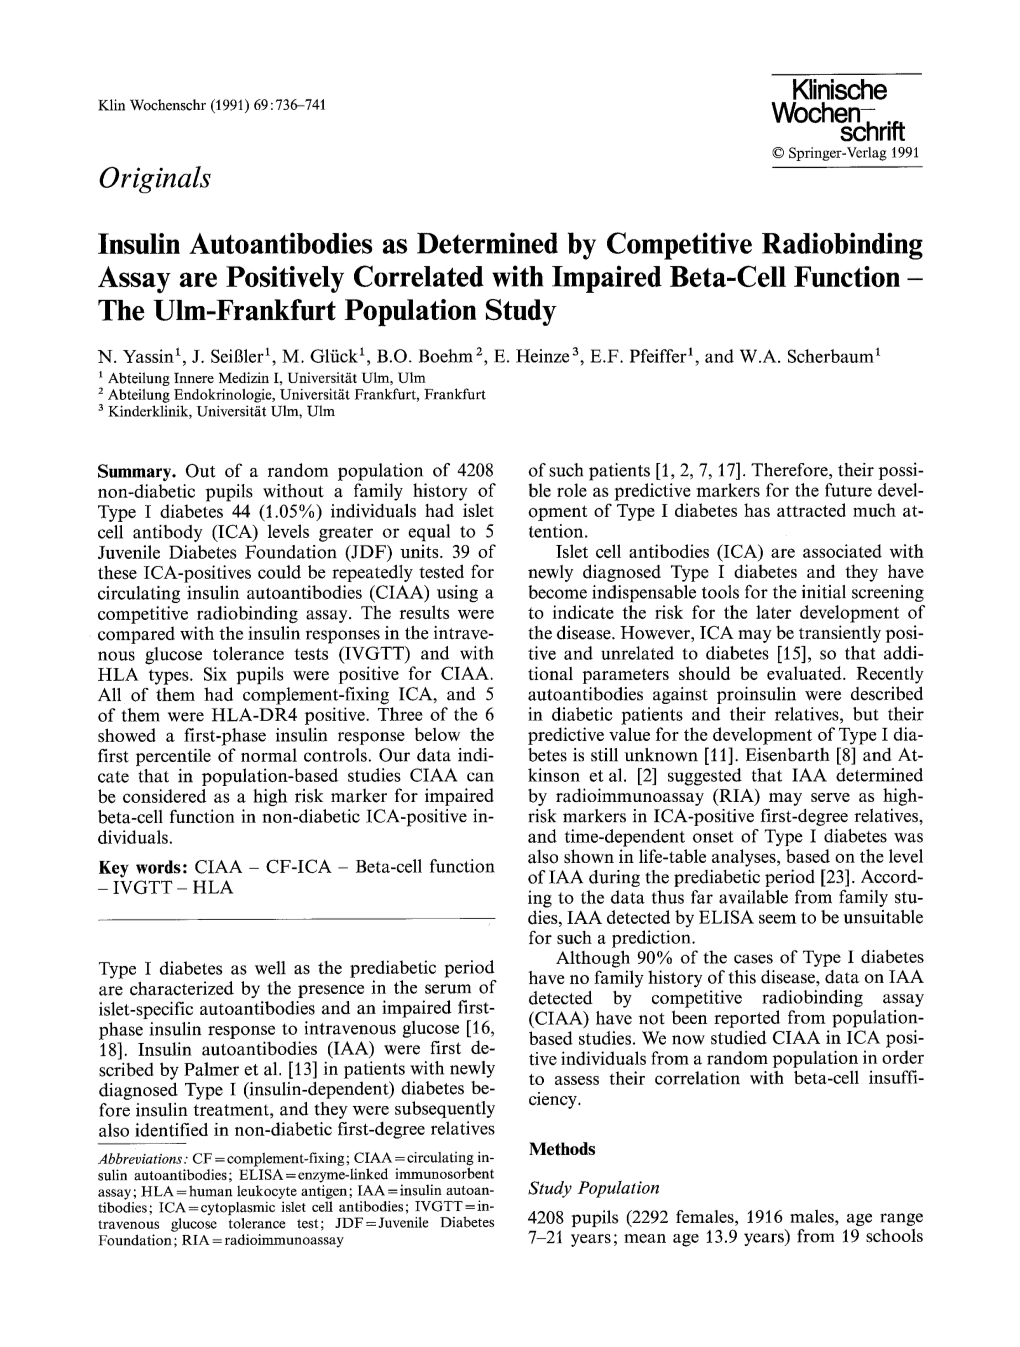 Insulin Autoantibodies As Determined by Competitive Radiobinding Assay Are Positively Correlated with Impaired Beta-Cell Function- the Ulm-Frankfurt Population Study